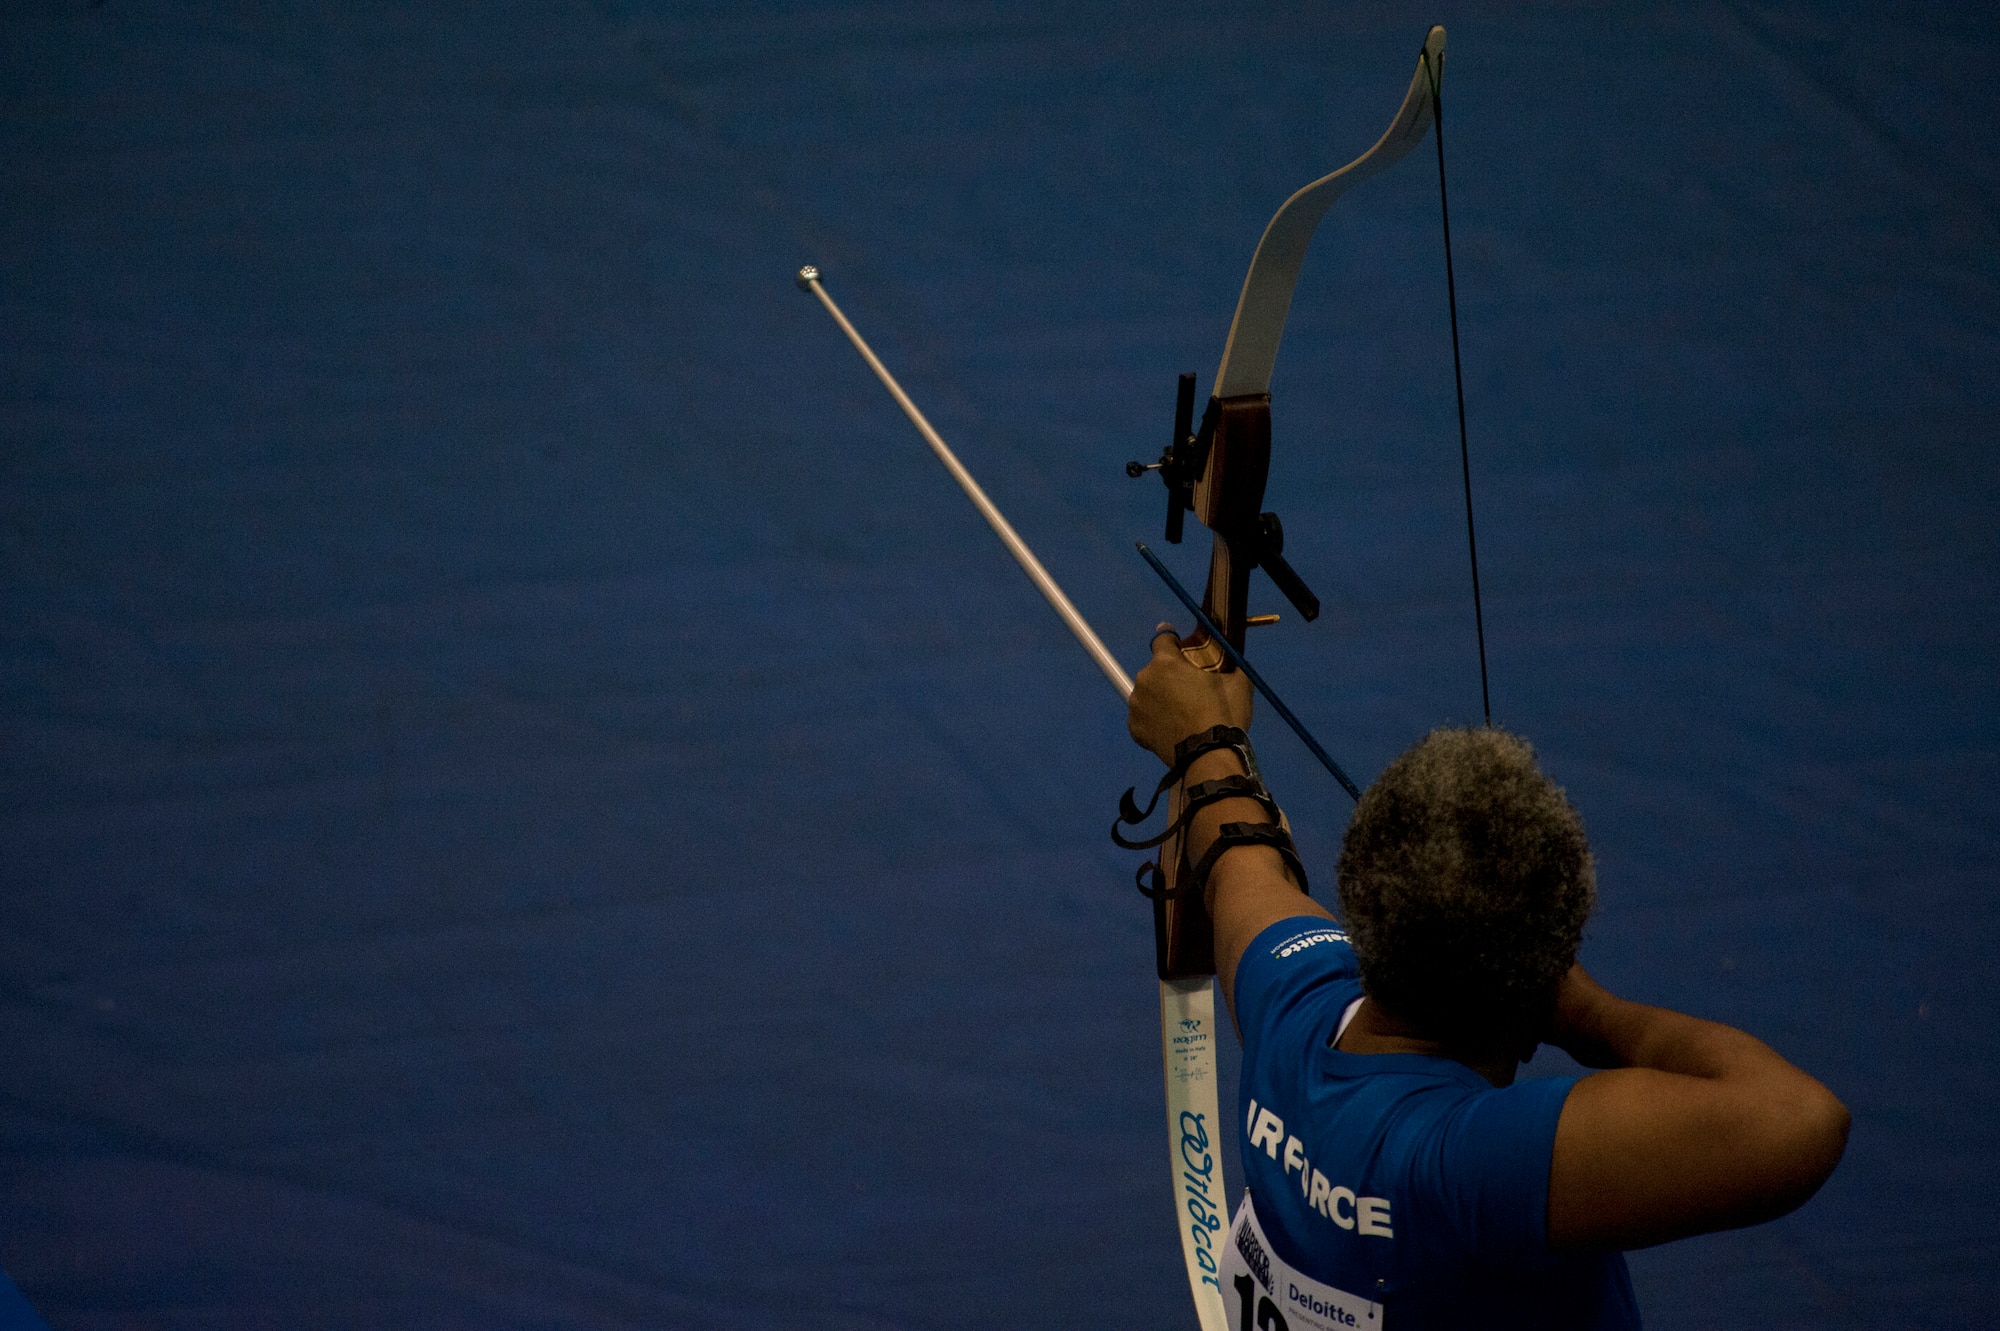 Gwen Sheppard draws back her bowstring for a shot during the archery competition of the 2012 Warrior Games at the U.S. Air Force Academy in Colorado Springs, Colo., May 2, 2012. Sheppard is with the Air Force team. (U.S. Air Force photo/Val Gempis) 